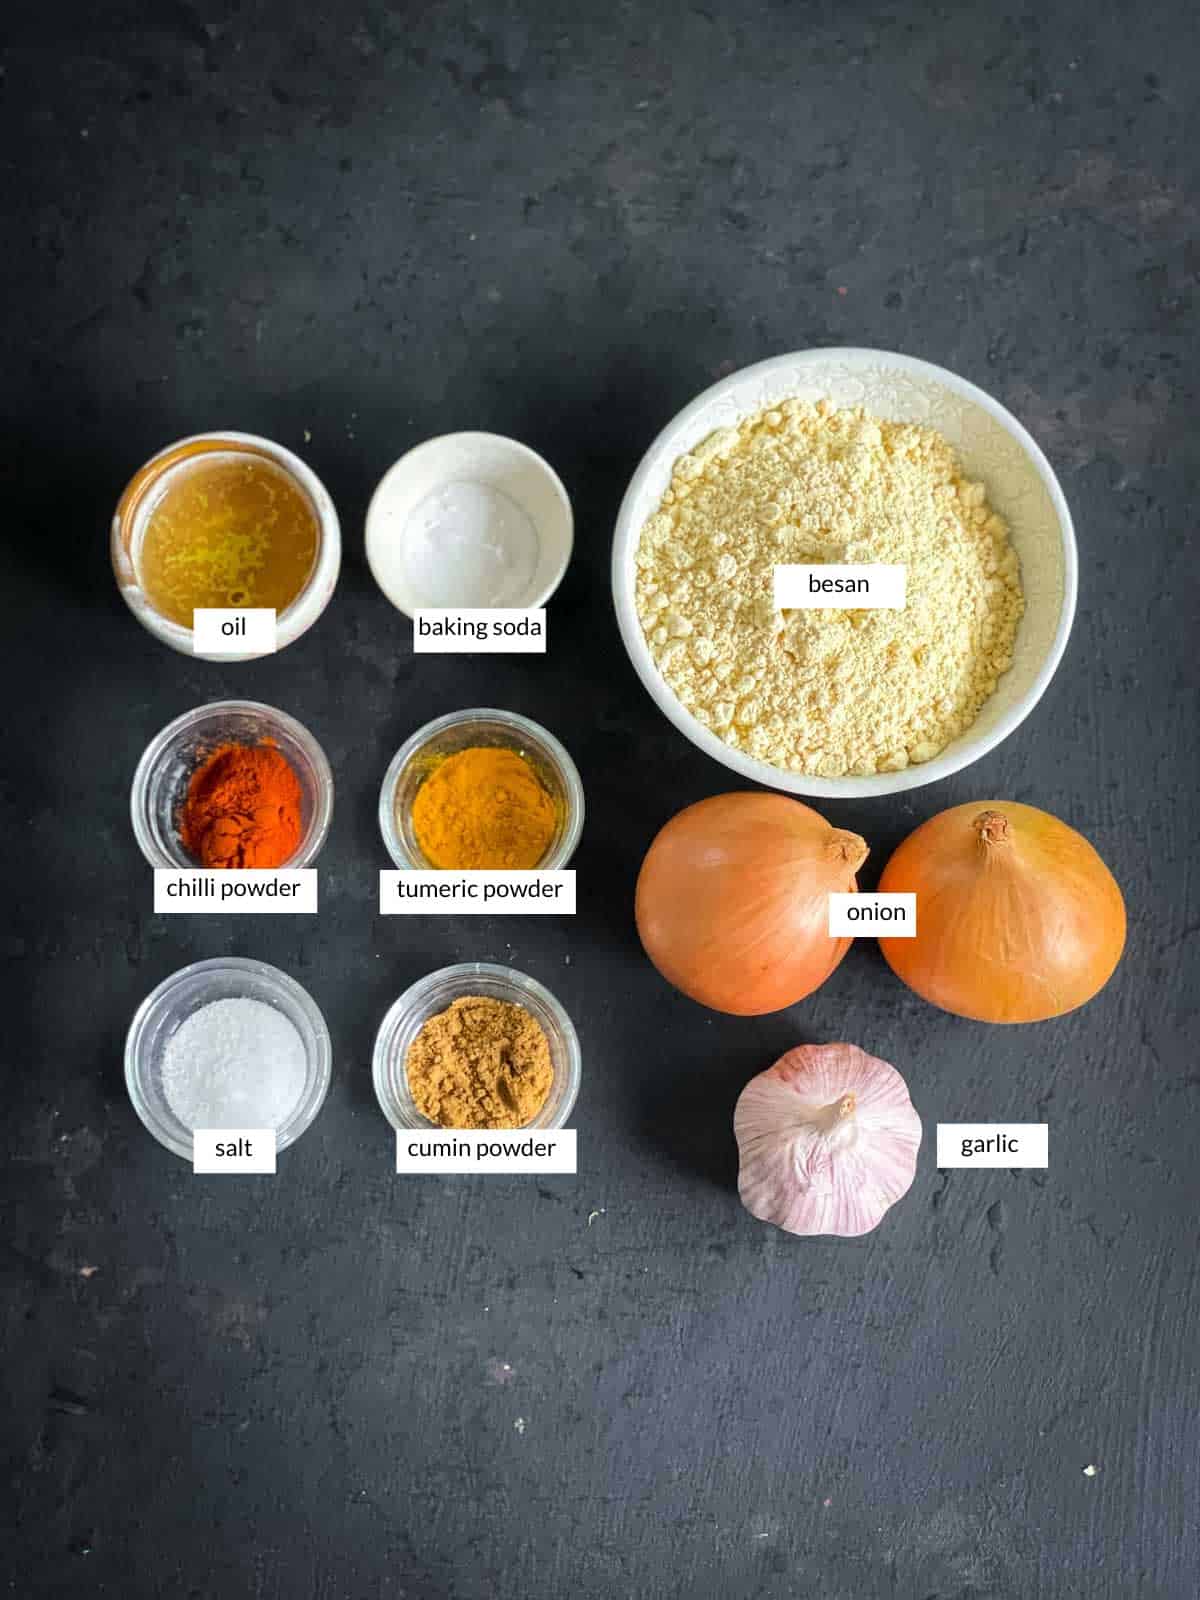 Individually labelled ingredients for Easy Onion Bhaji Recipe